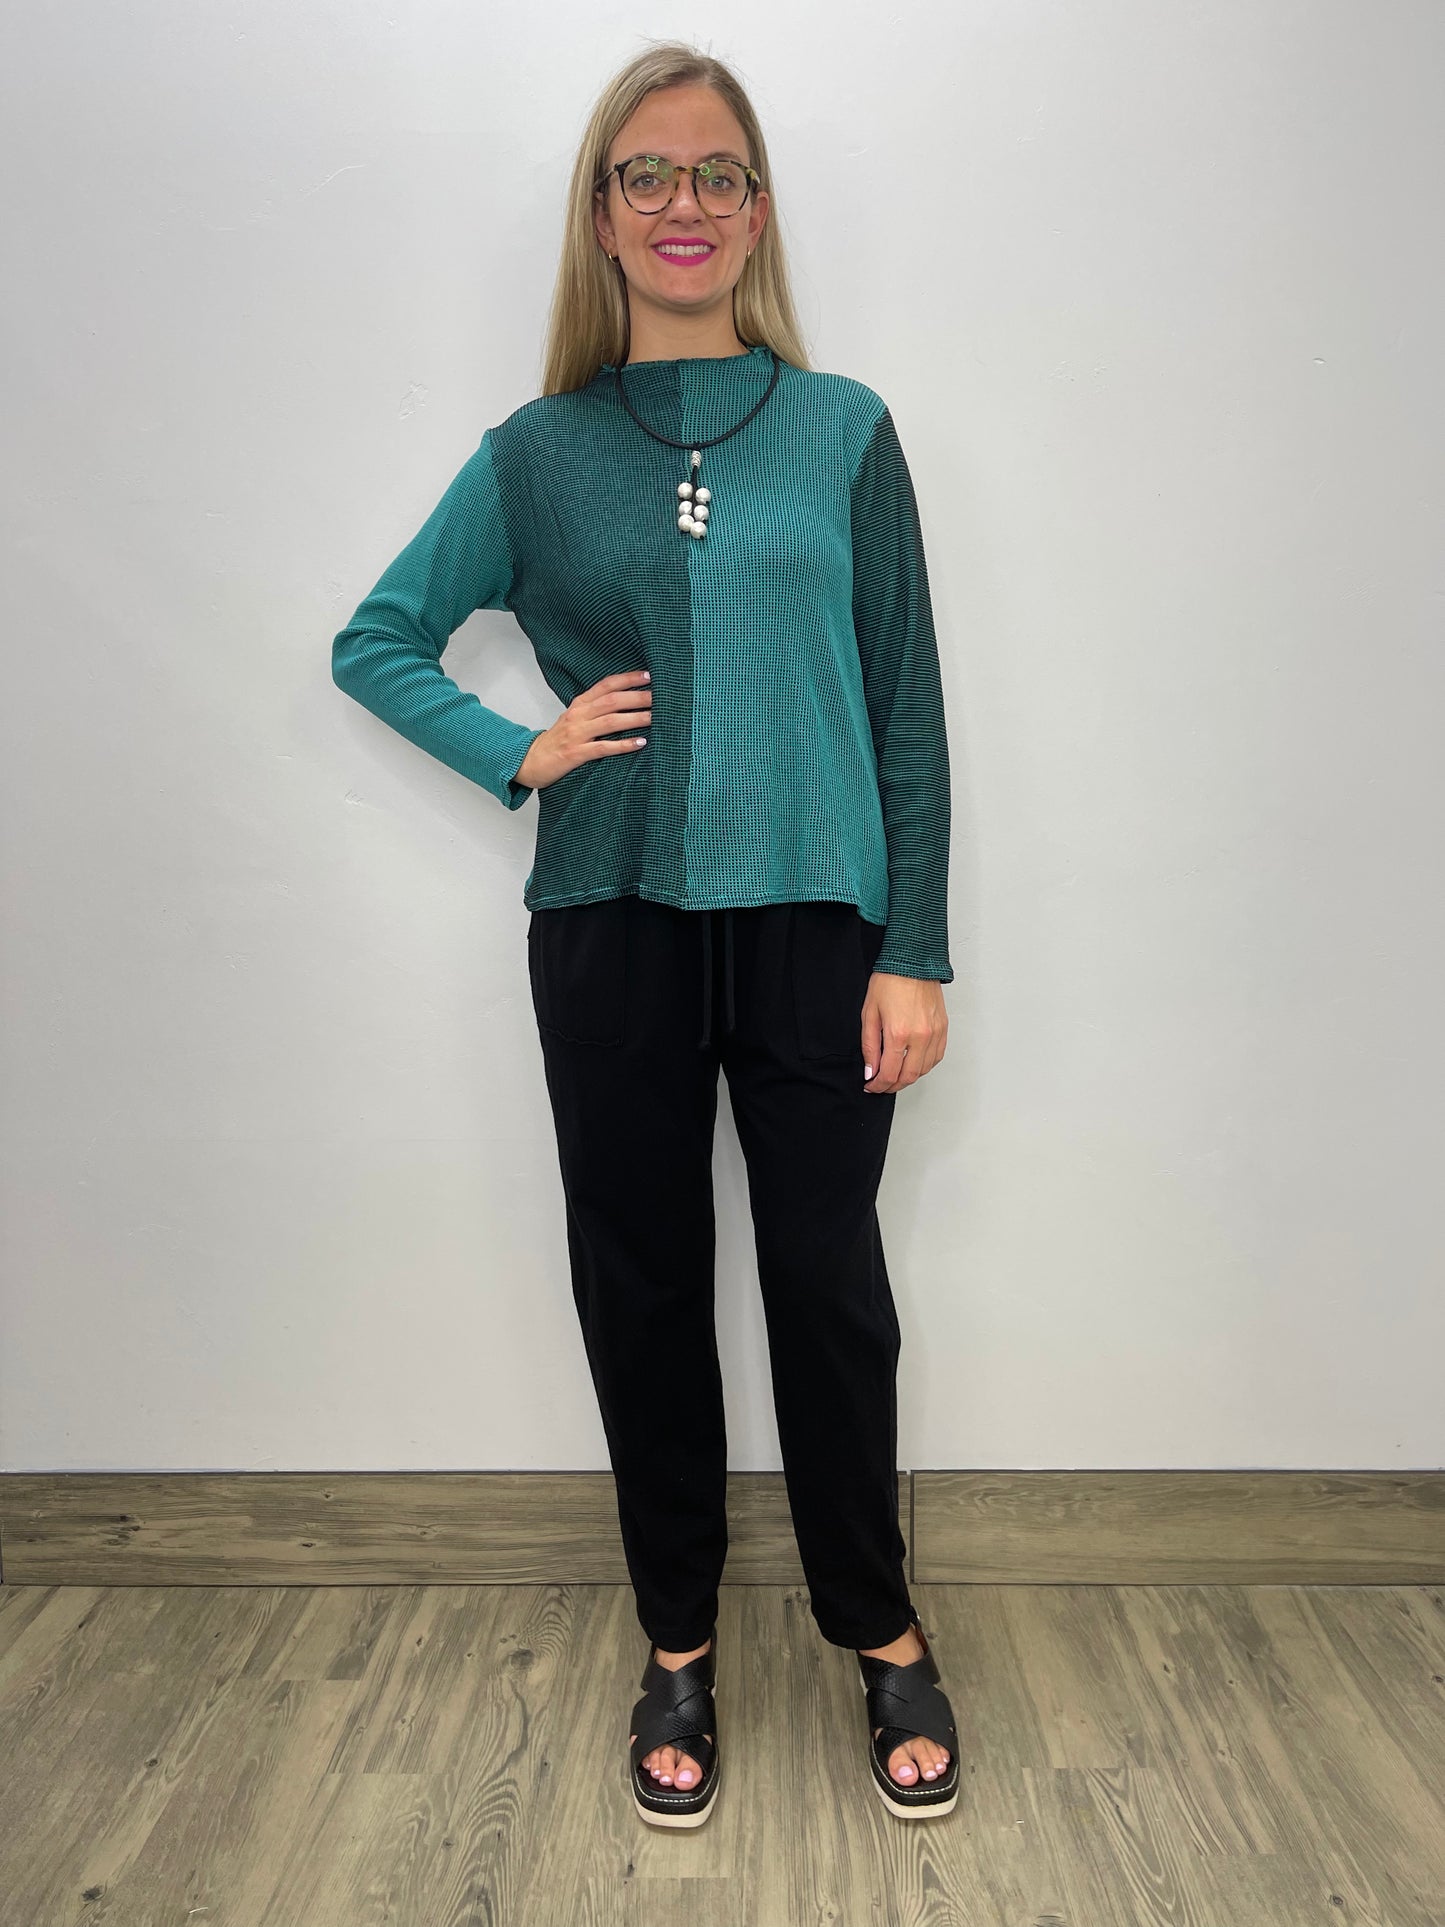 Teal Waffle Thermal Top